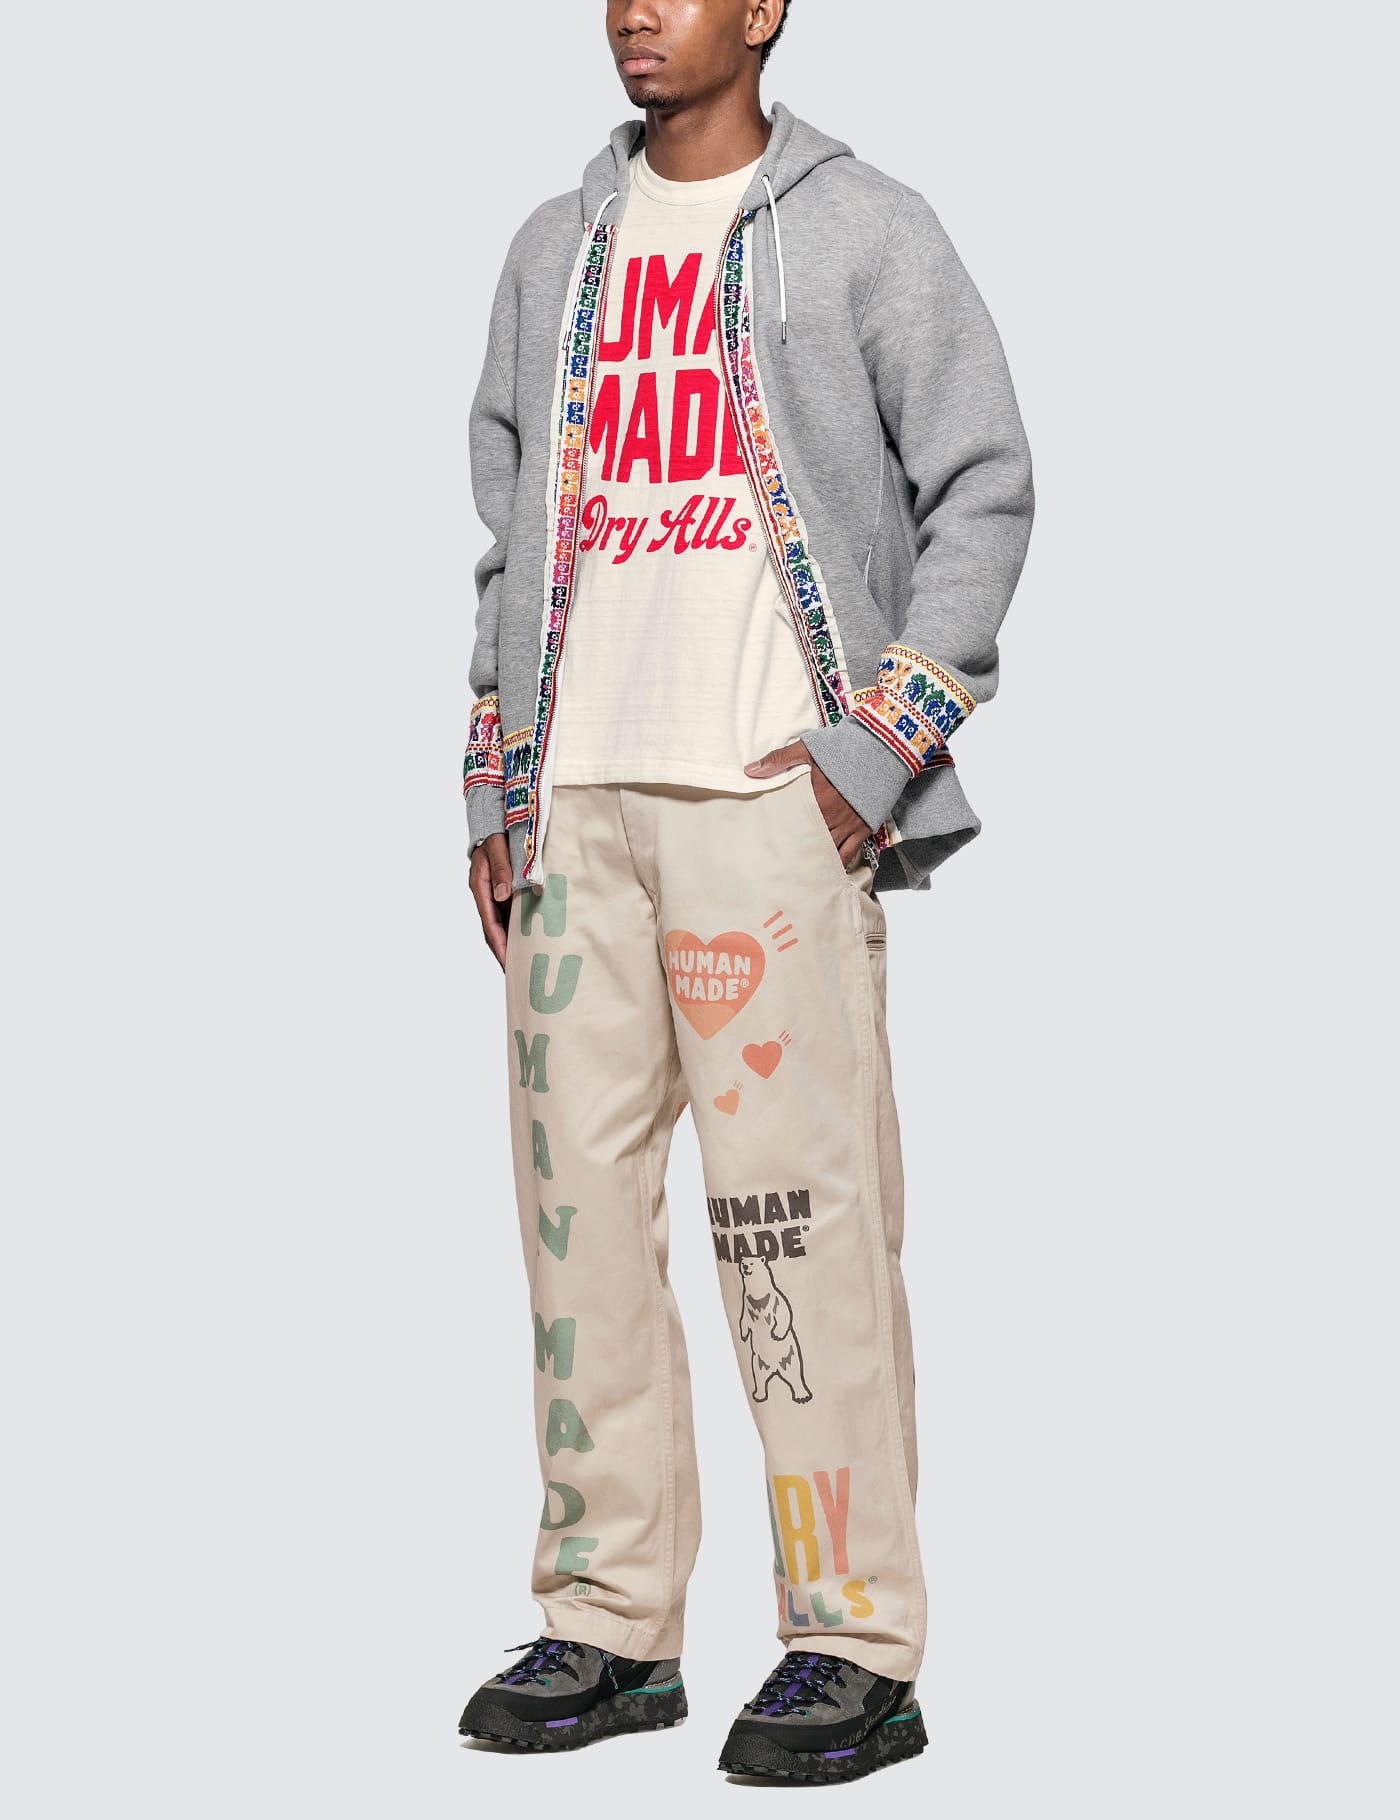 Human Made - Military Print Chino Pants | HBX - Globally Curated Fashion  and Lifestyle by Hypebeast